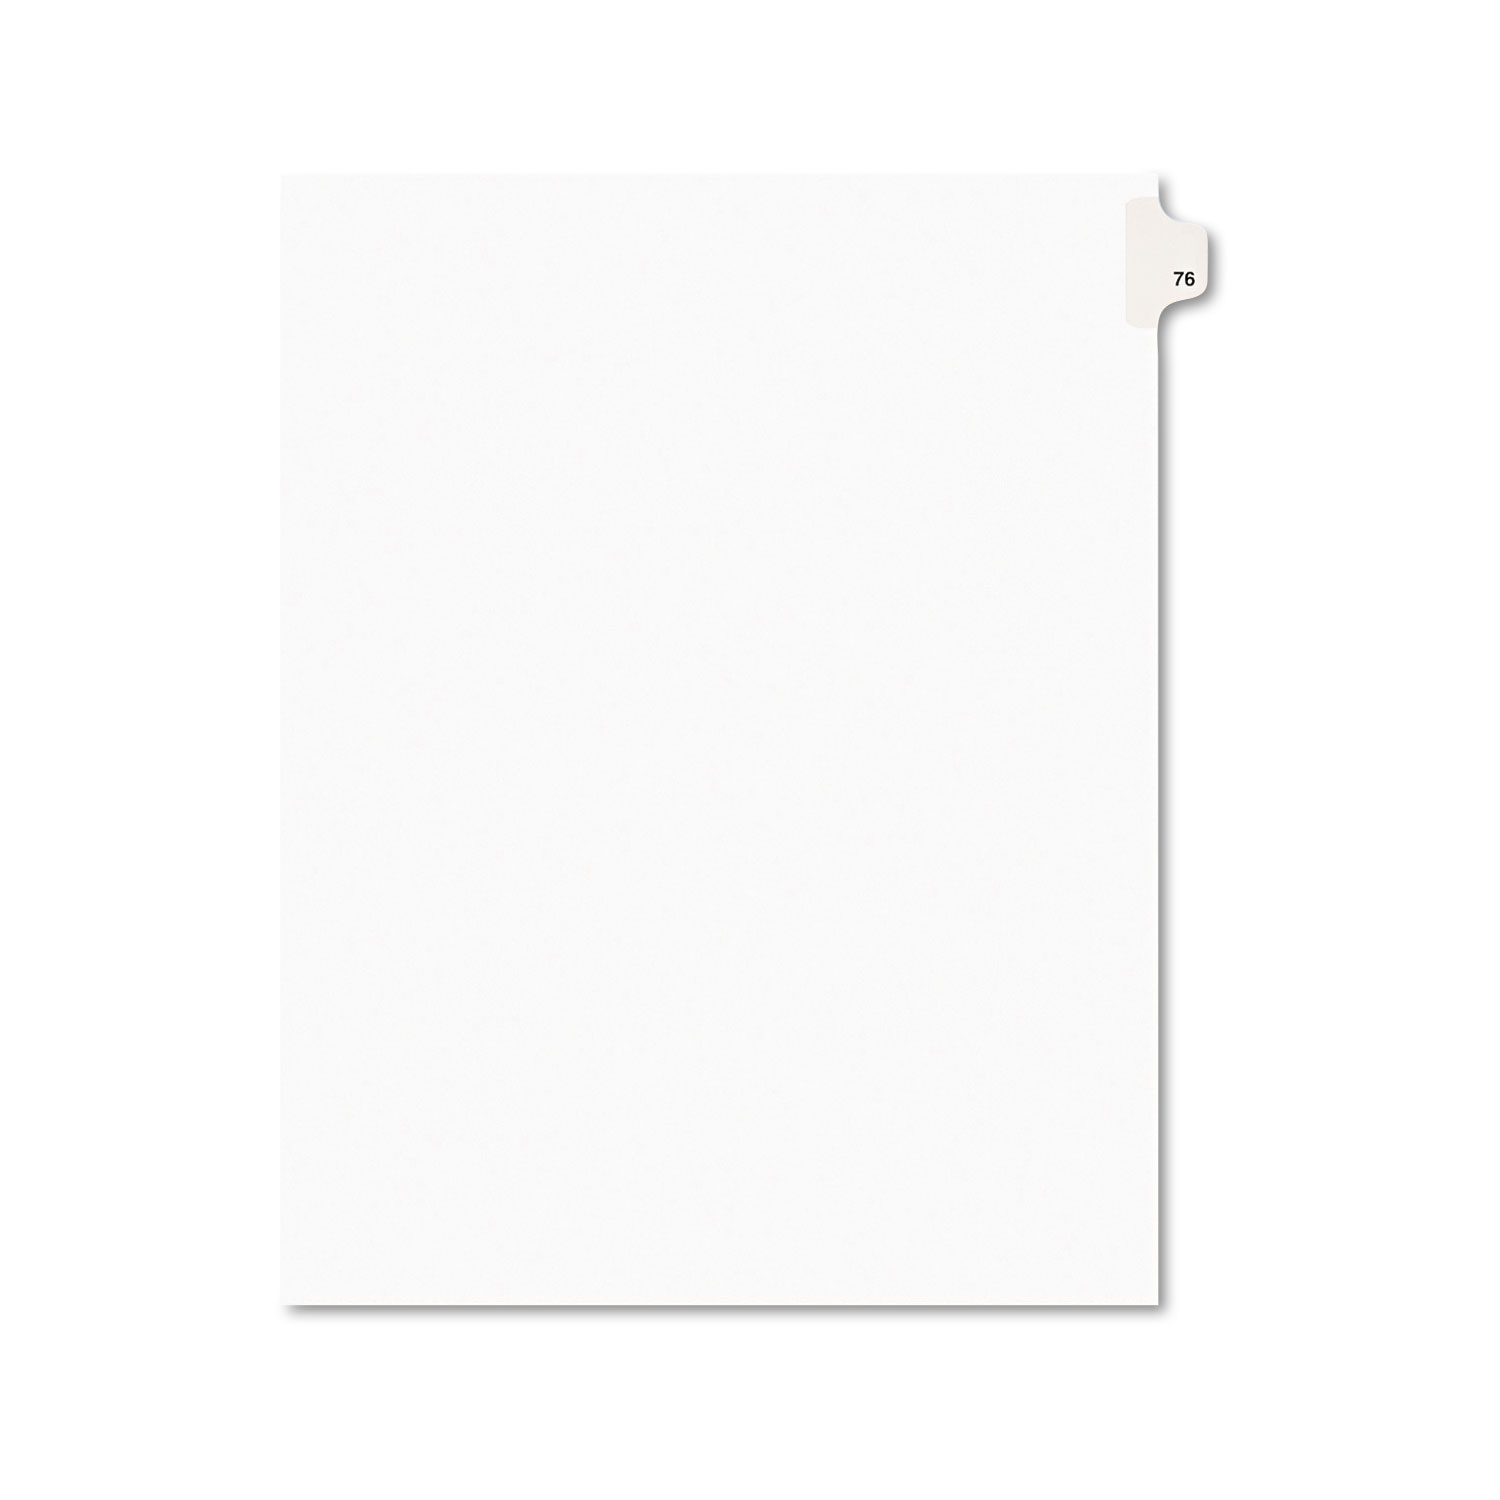  Avery 01076 Preprinted Legal Exhibit Side Tab Index Dividers, Avery Style, 10-Tab, 76, 11 x 8.5, White, 25/Pack (AVE01076) 